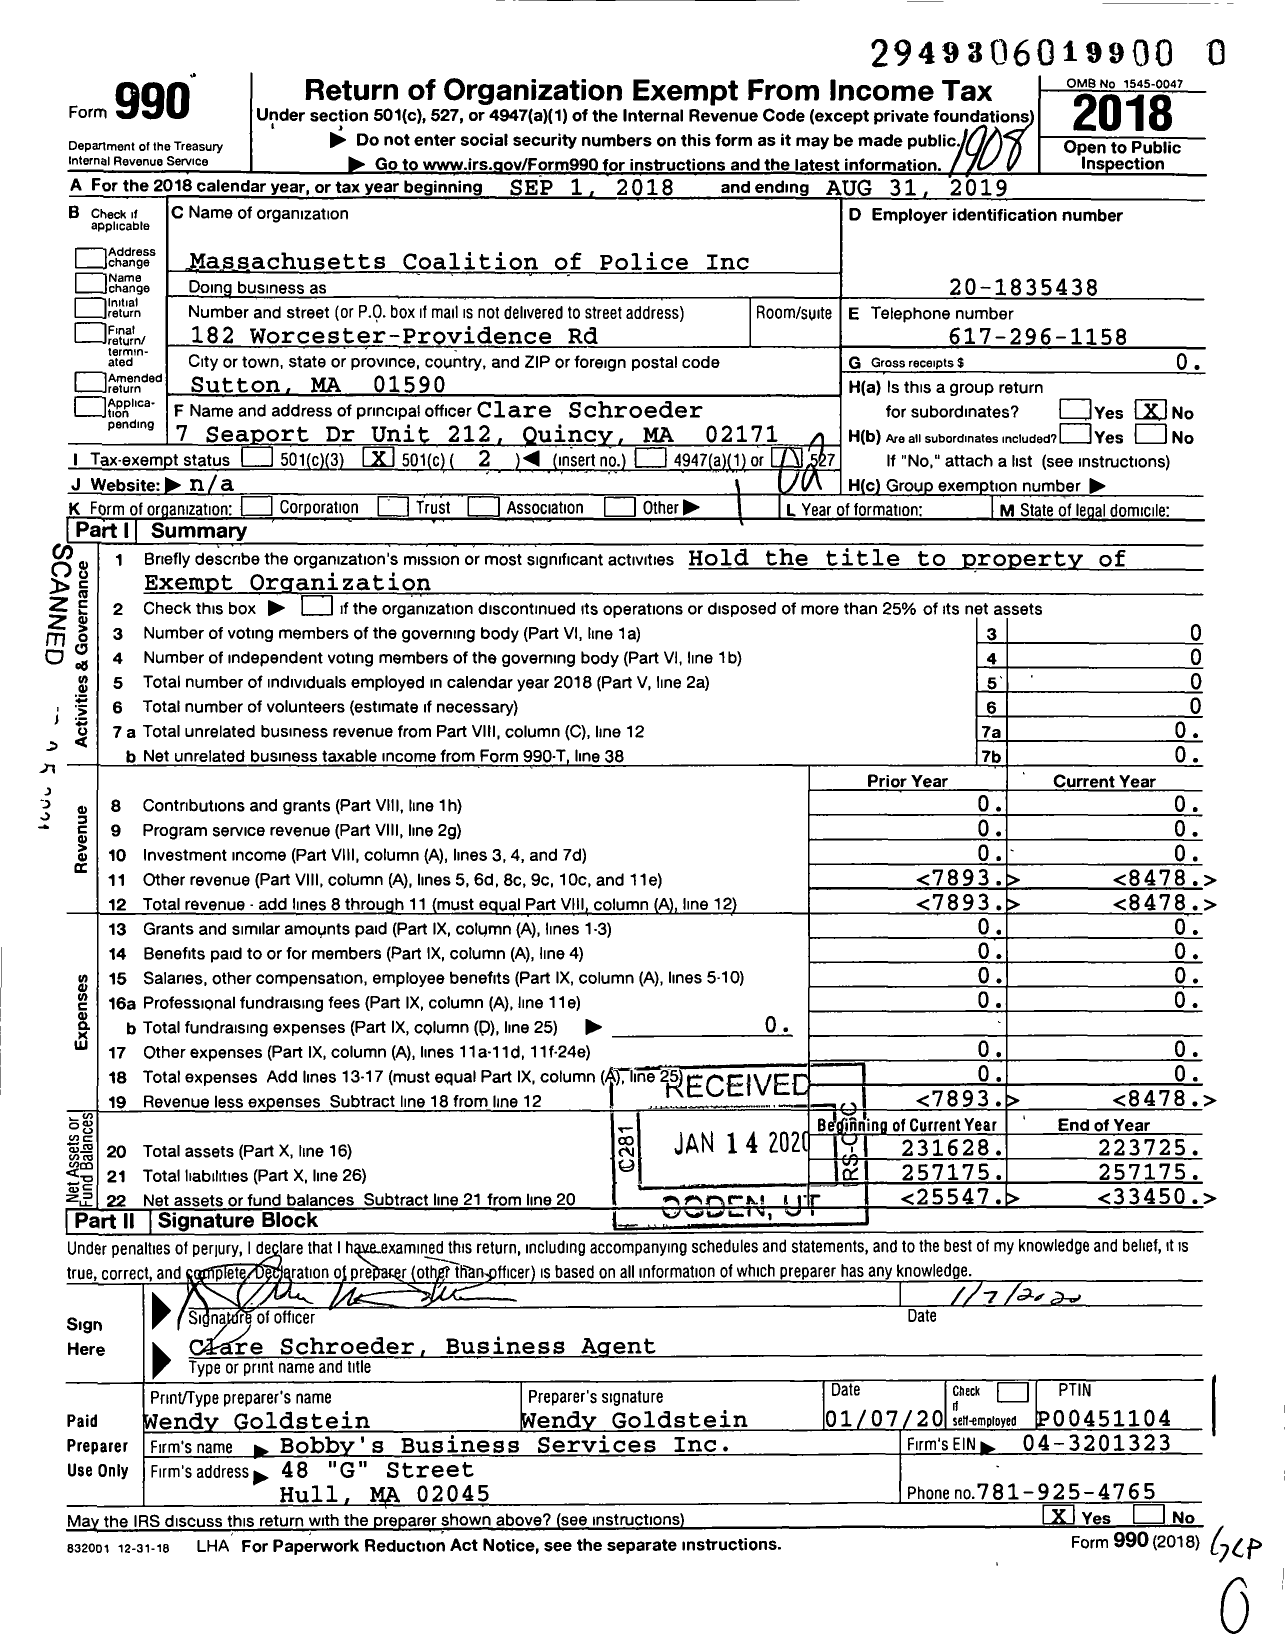 Image of first page of 2018 Form 990O for Massachusetts Coalition of Police